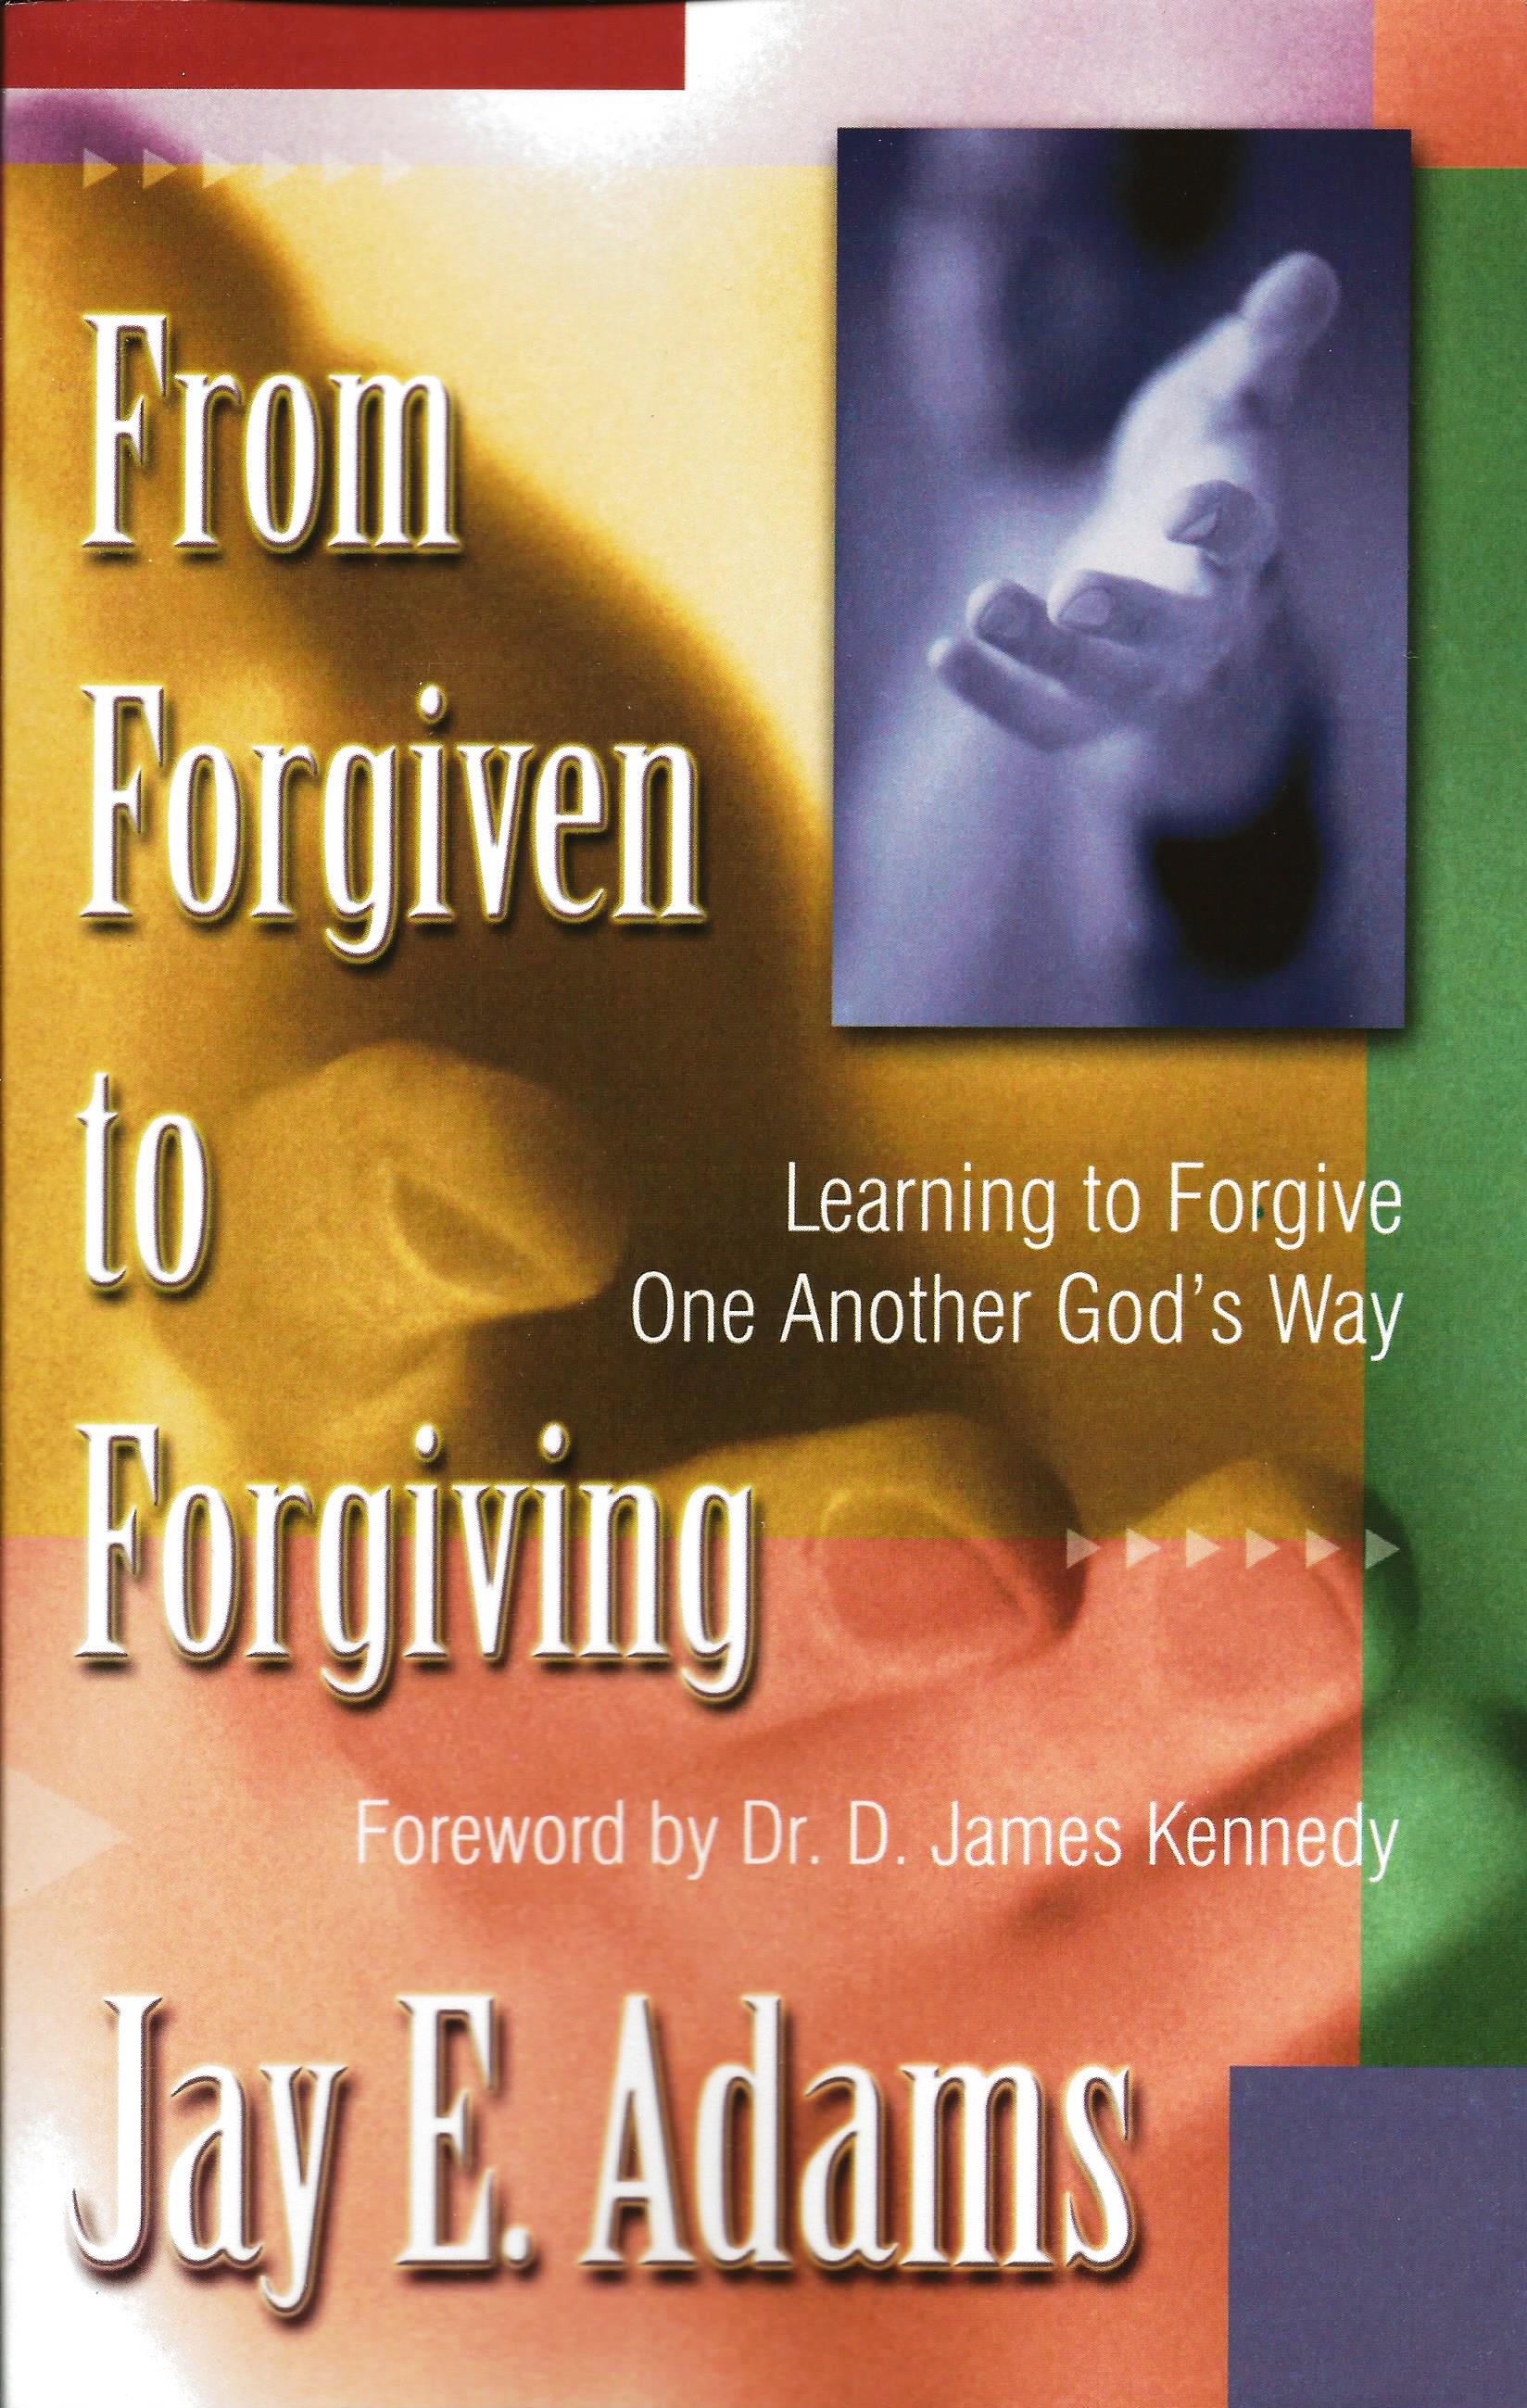 FROM FORGIVEN TO FORGIVING Jay E. Adams